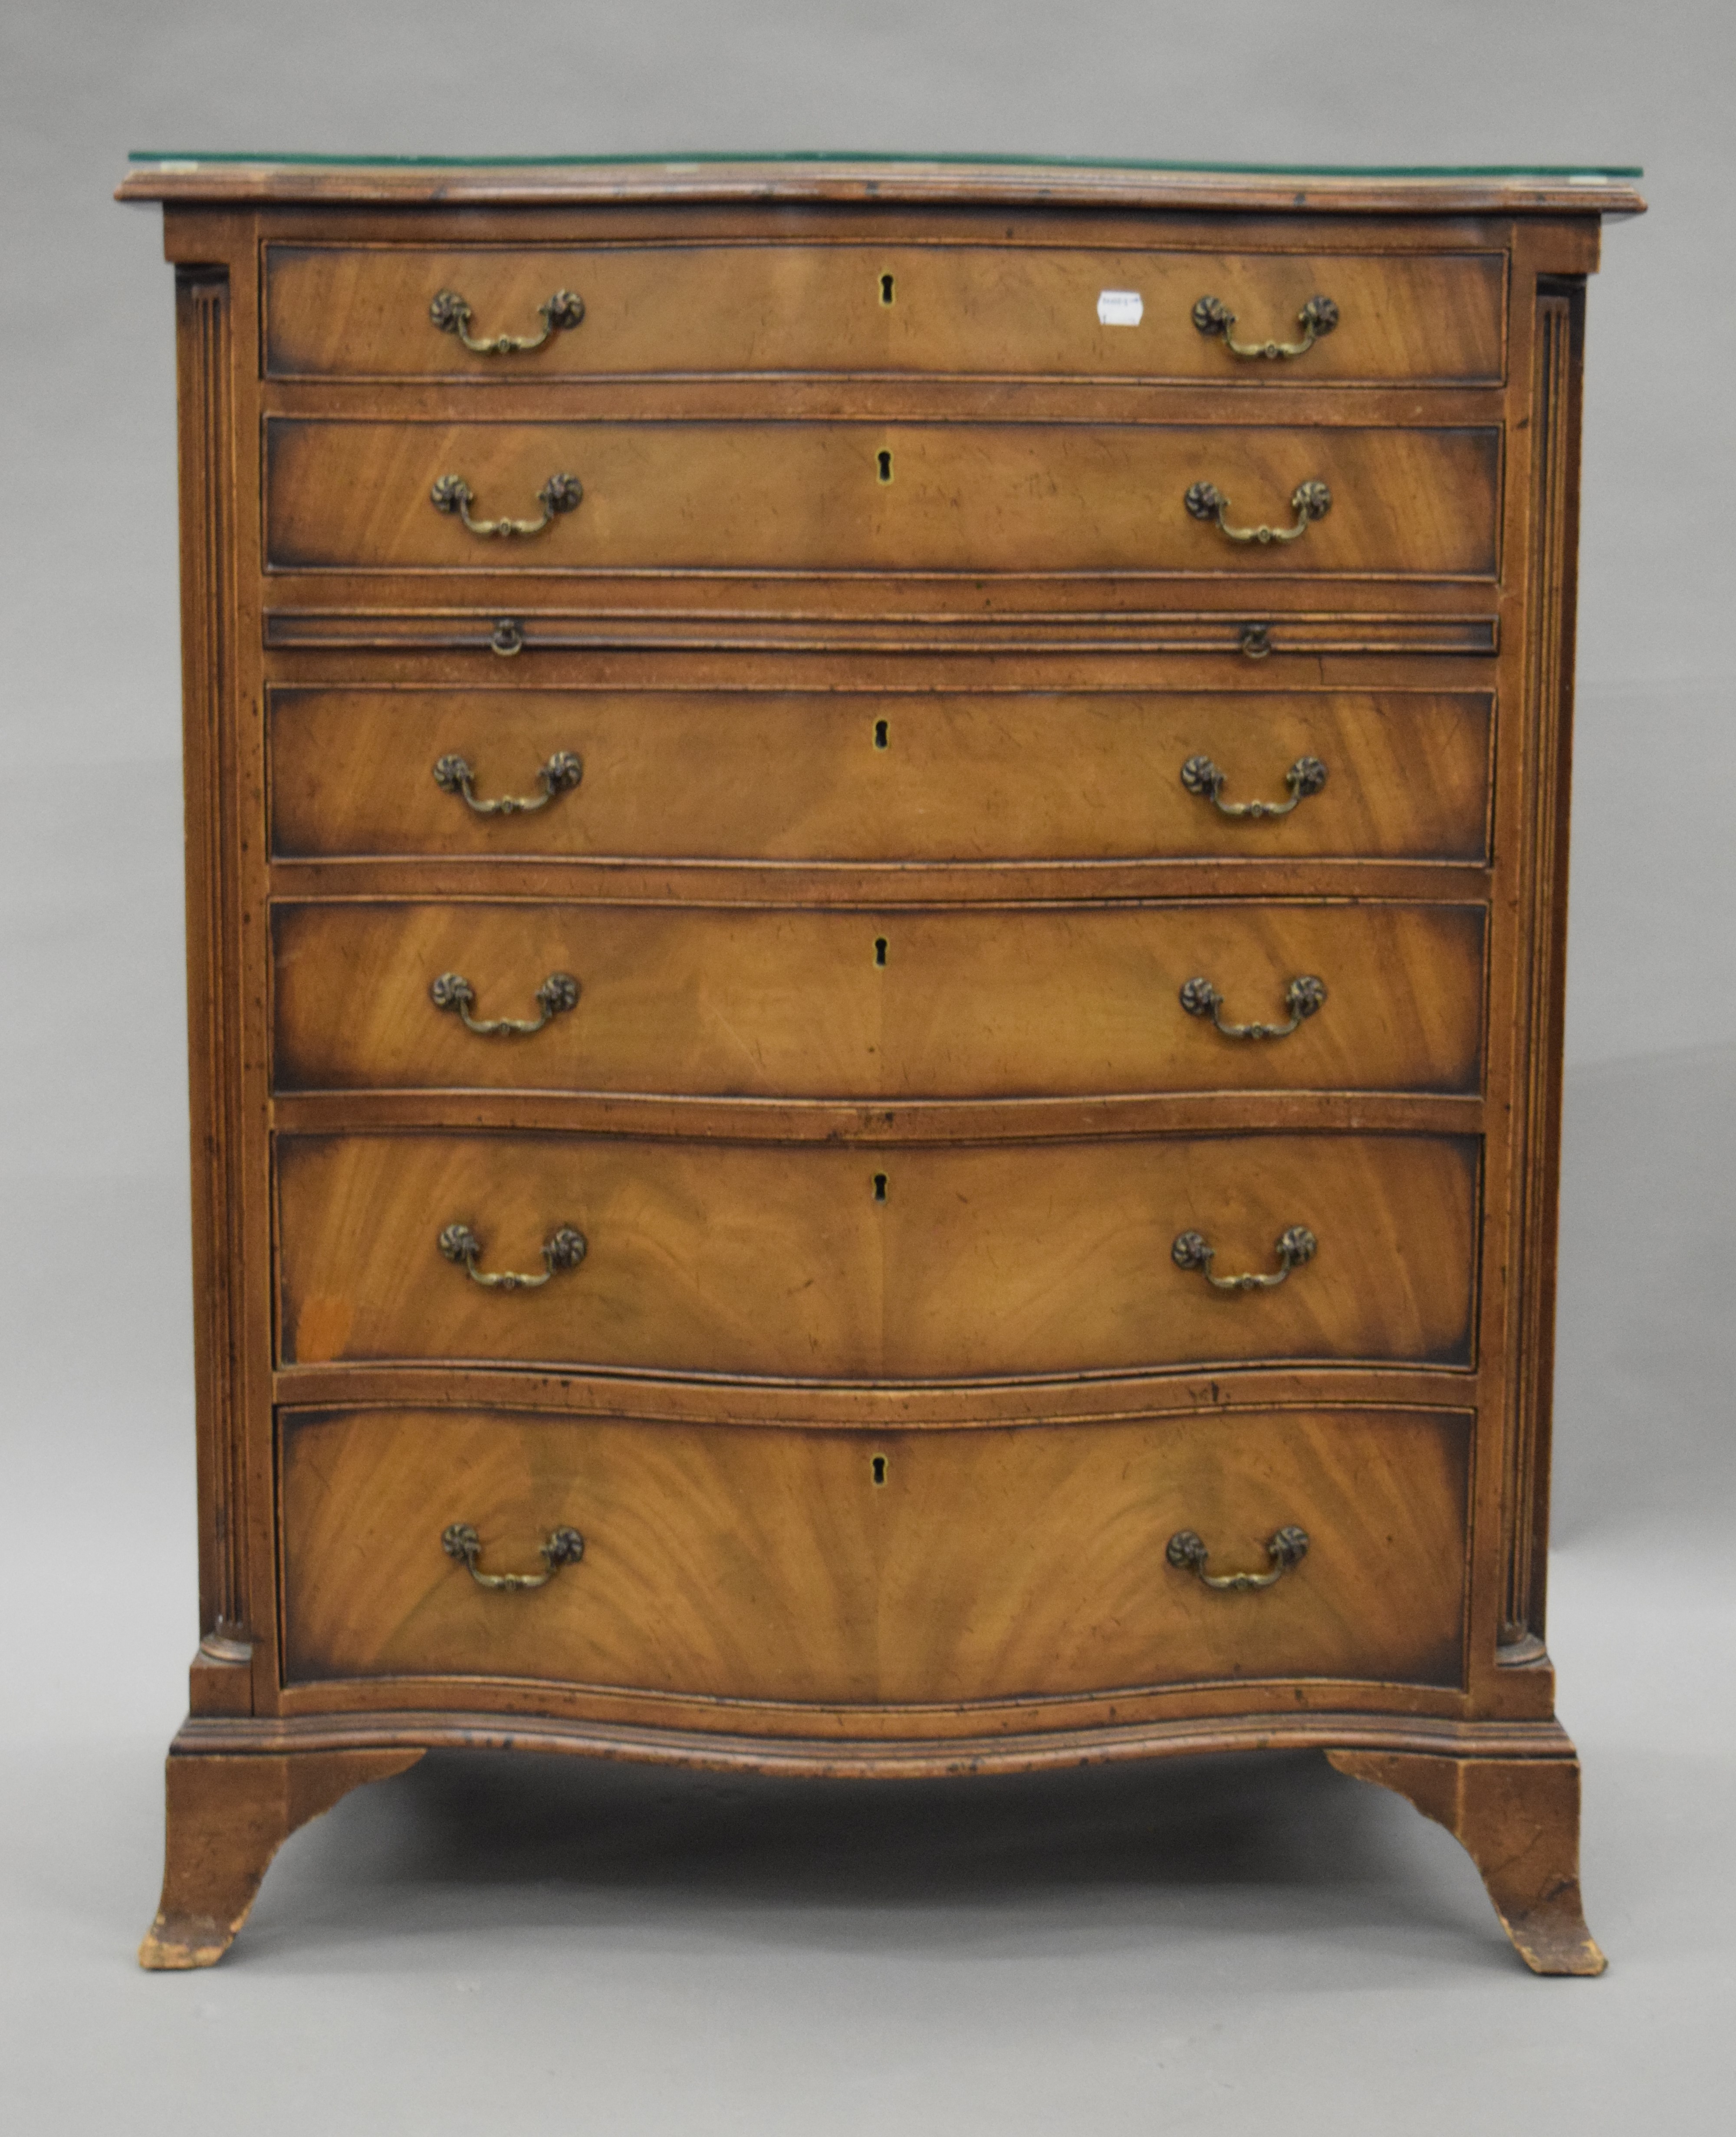 A George III style mahogany Serpentine chest of drawers. 83.5 cm wide, 100 cm high, 49 cm deep. - Image 2 of 6